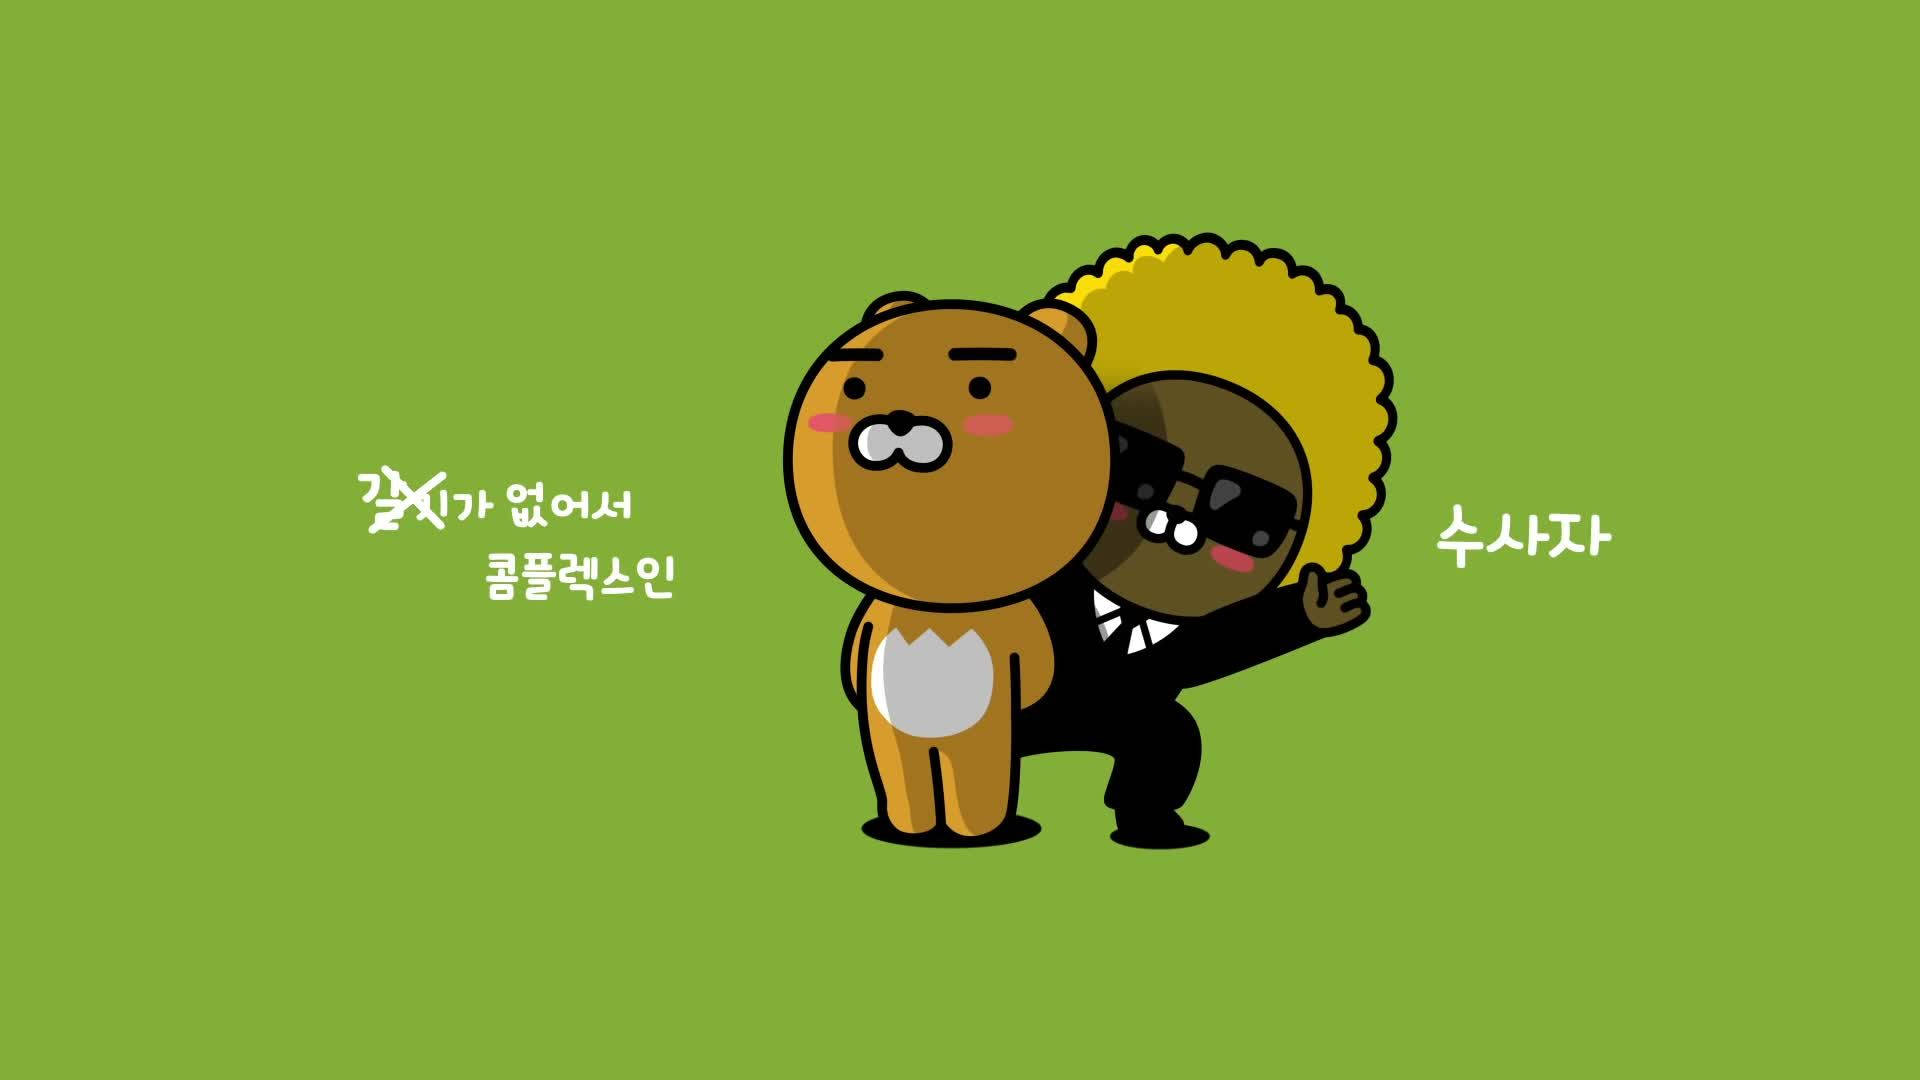 Friendship Goals - Ryan And Jay-g From Kakao Friends Background